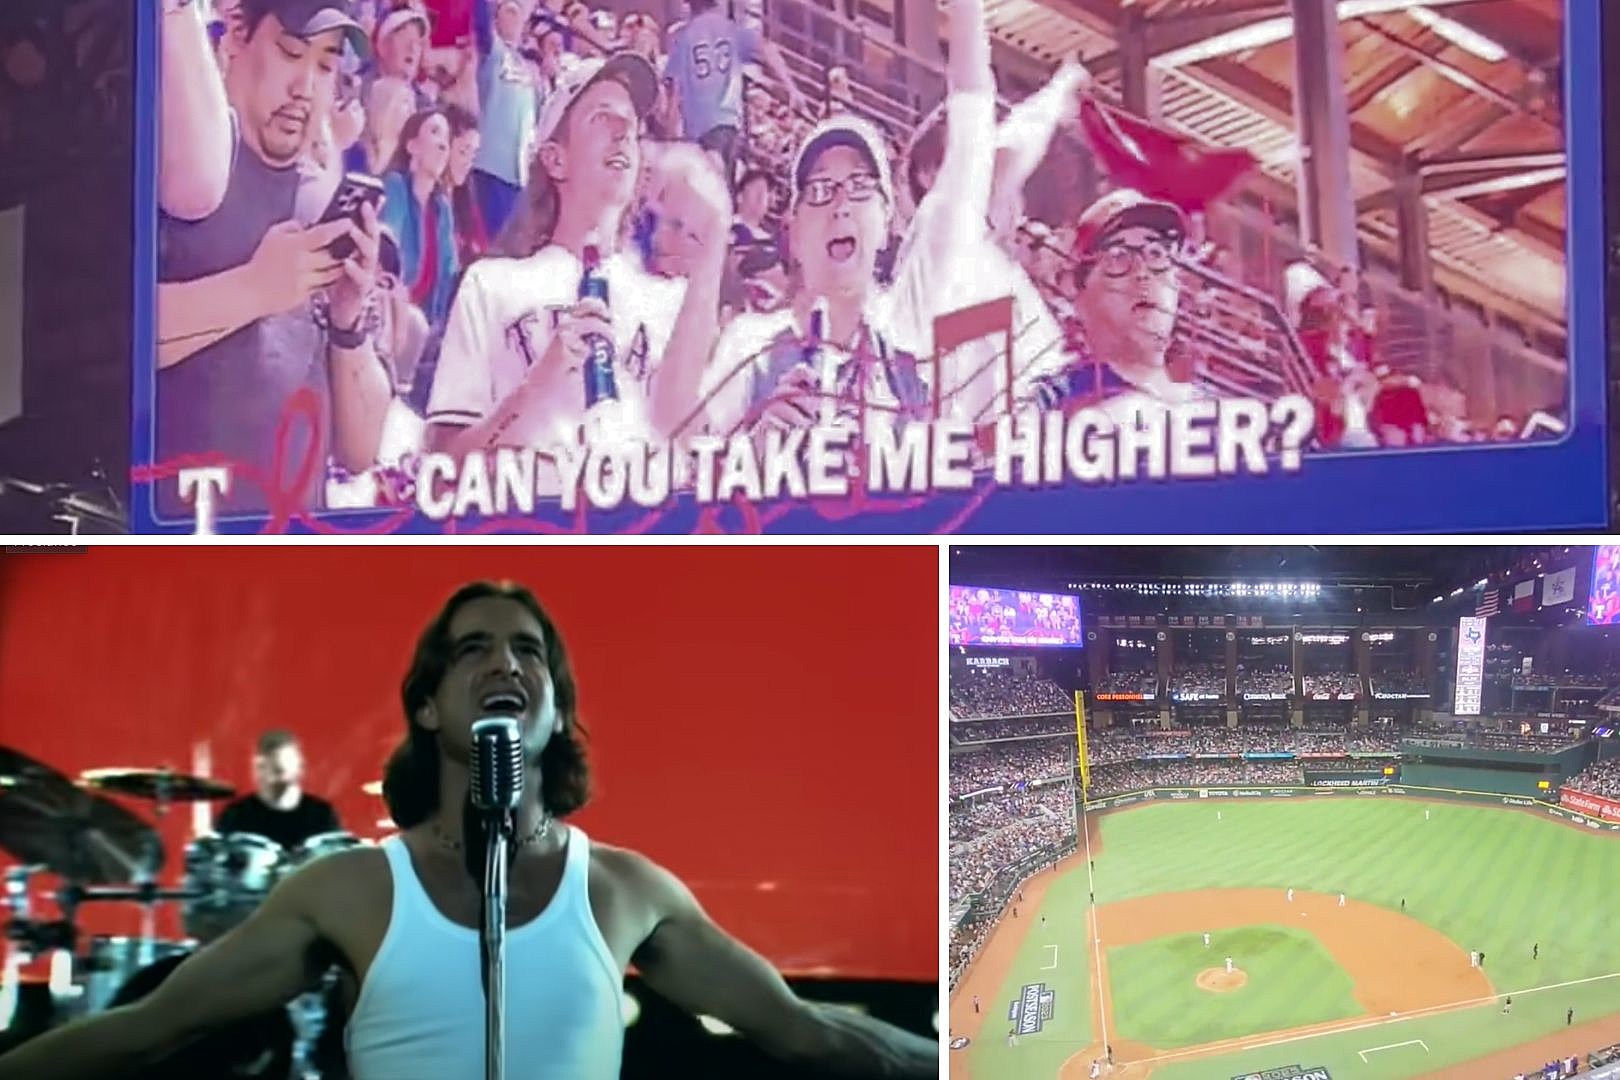 Baseball Stadium Sings Creed Together, Team Advances in Playoffs